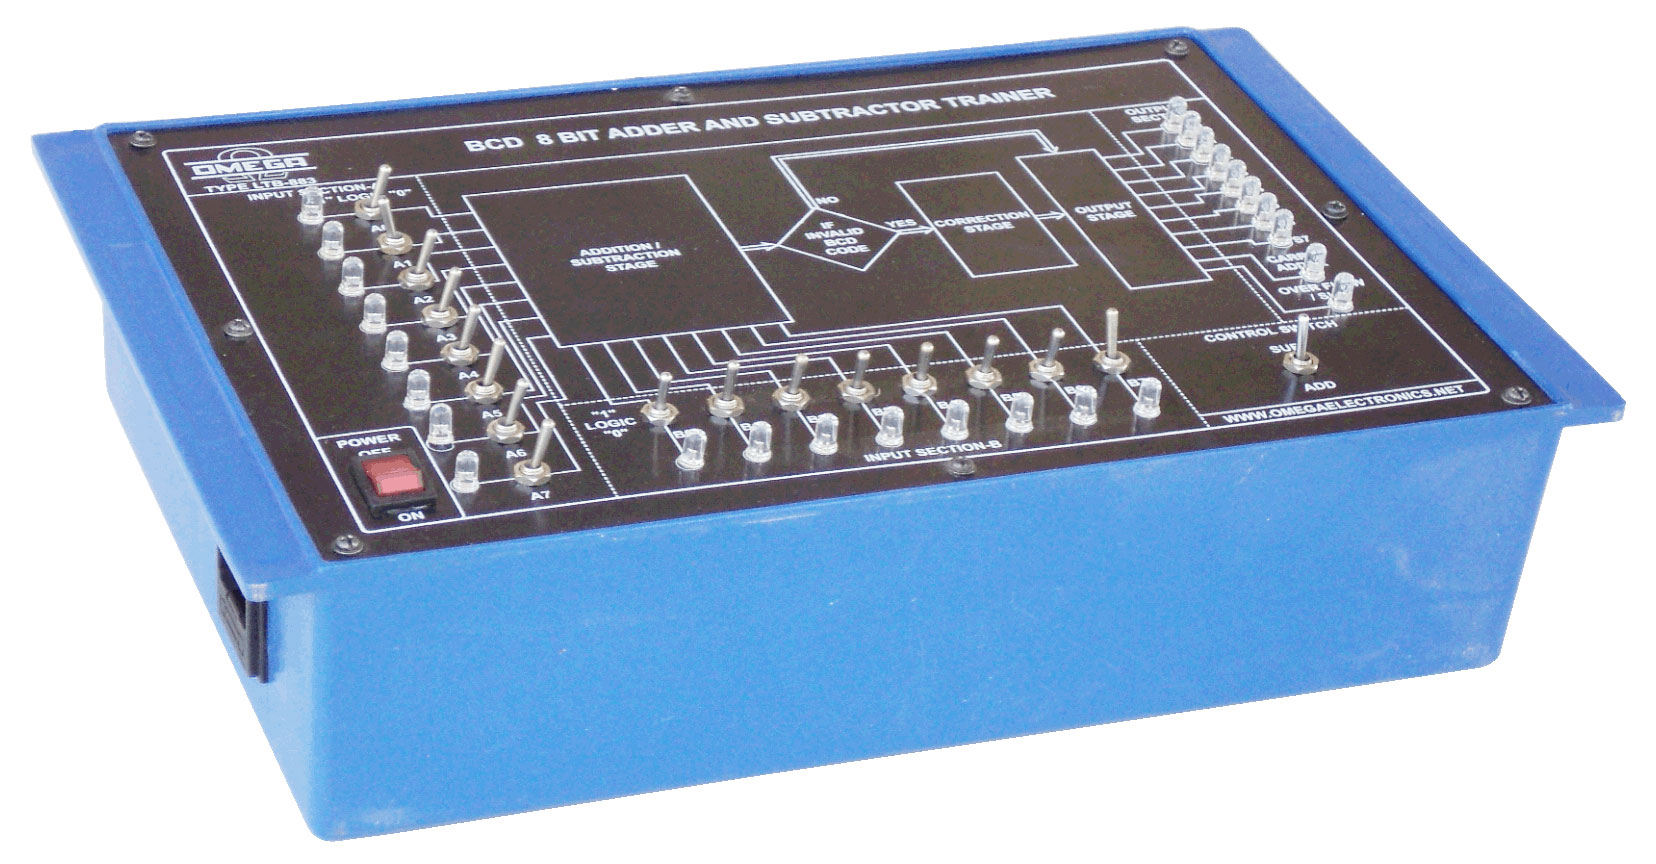 BCD  8 BIT ADDER AND SUBTRACTOR TRAINER